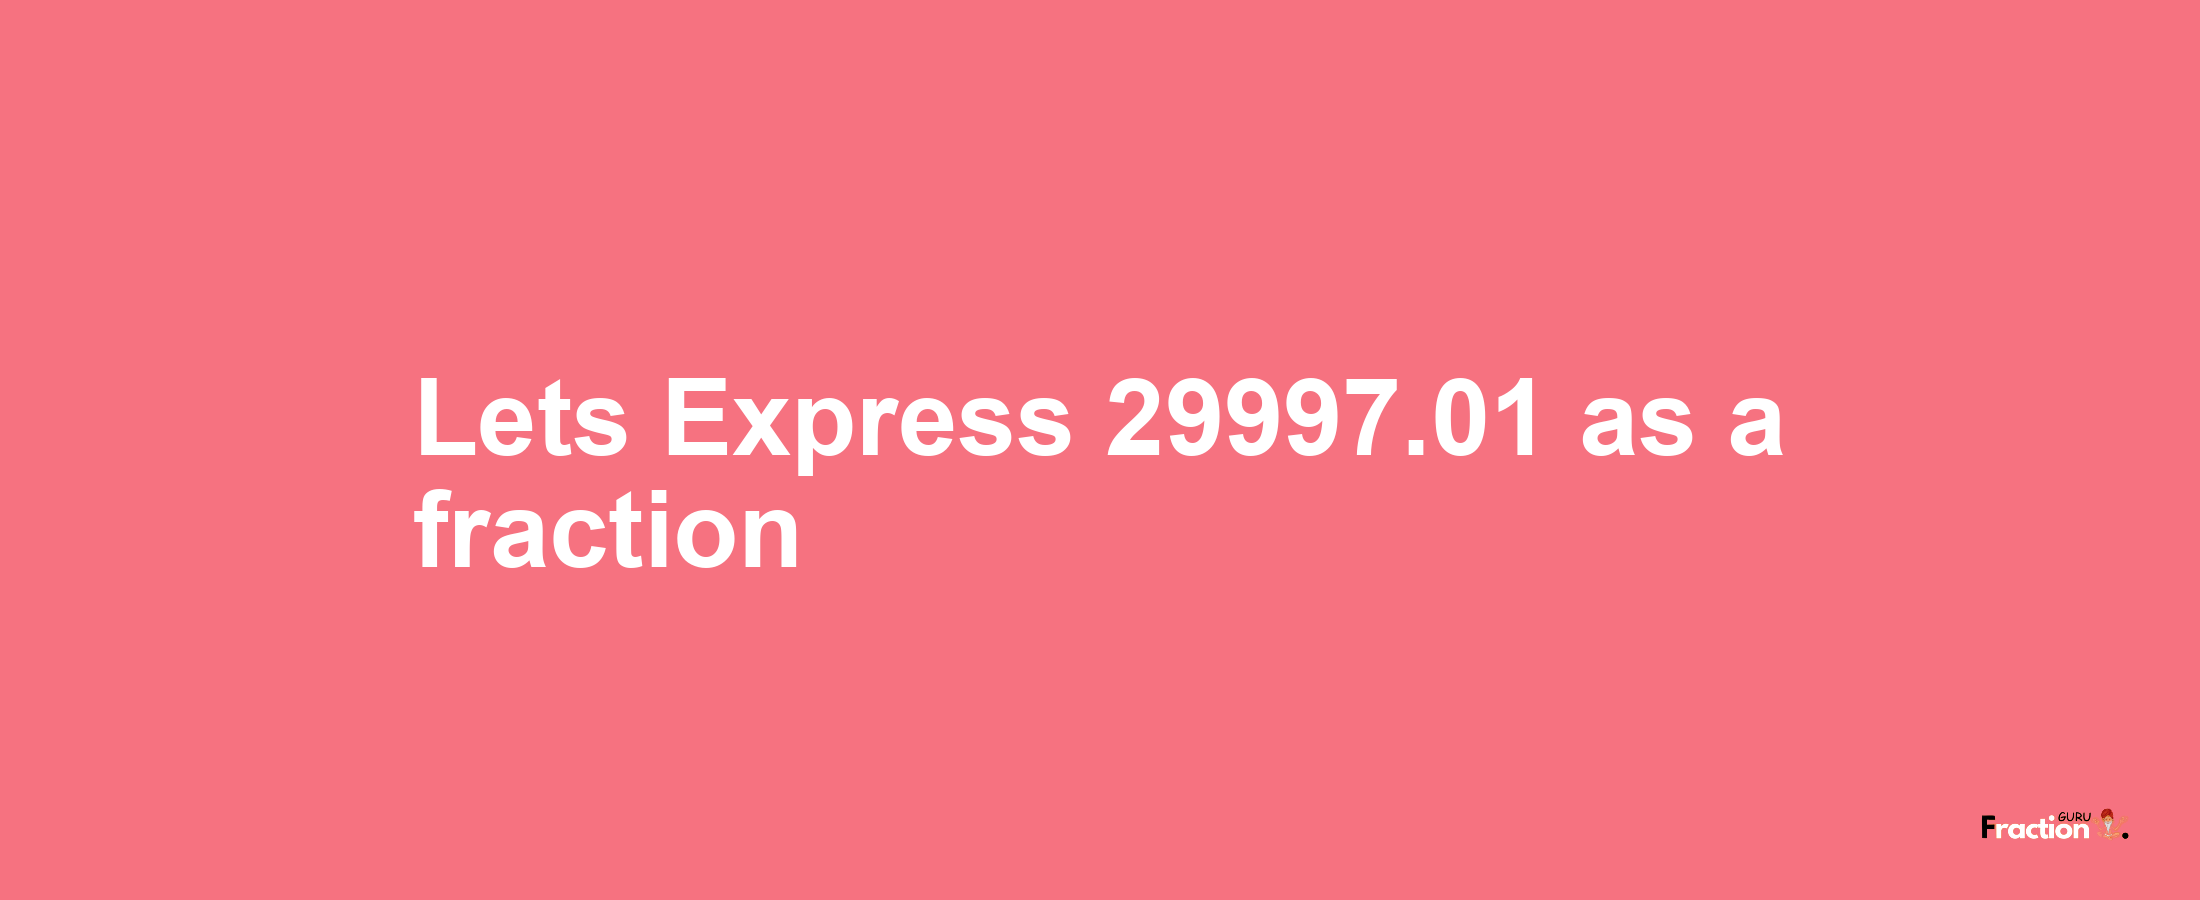 Lets Express 29997.01 as afraction